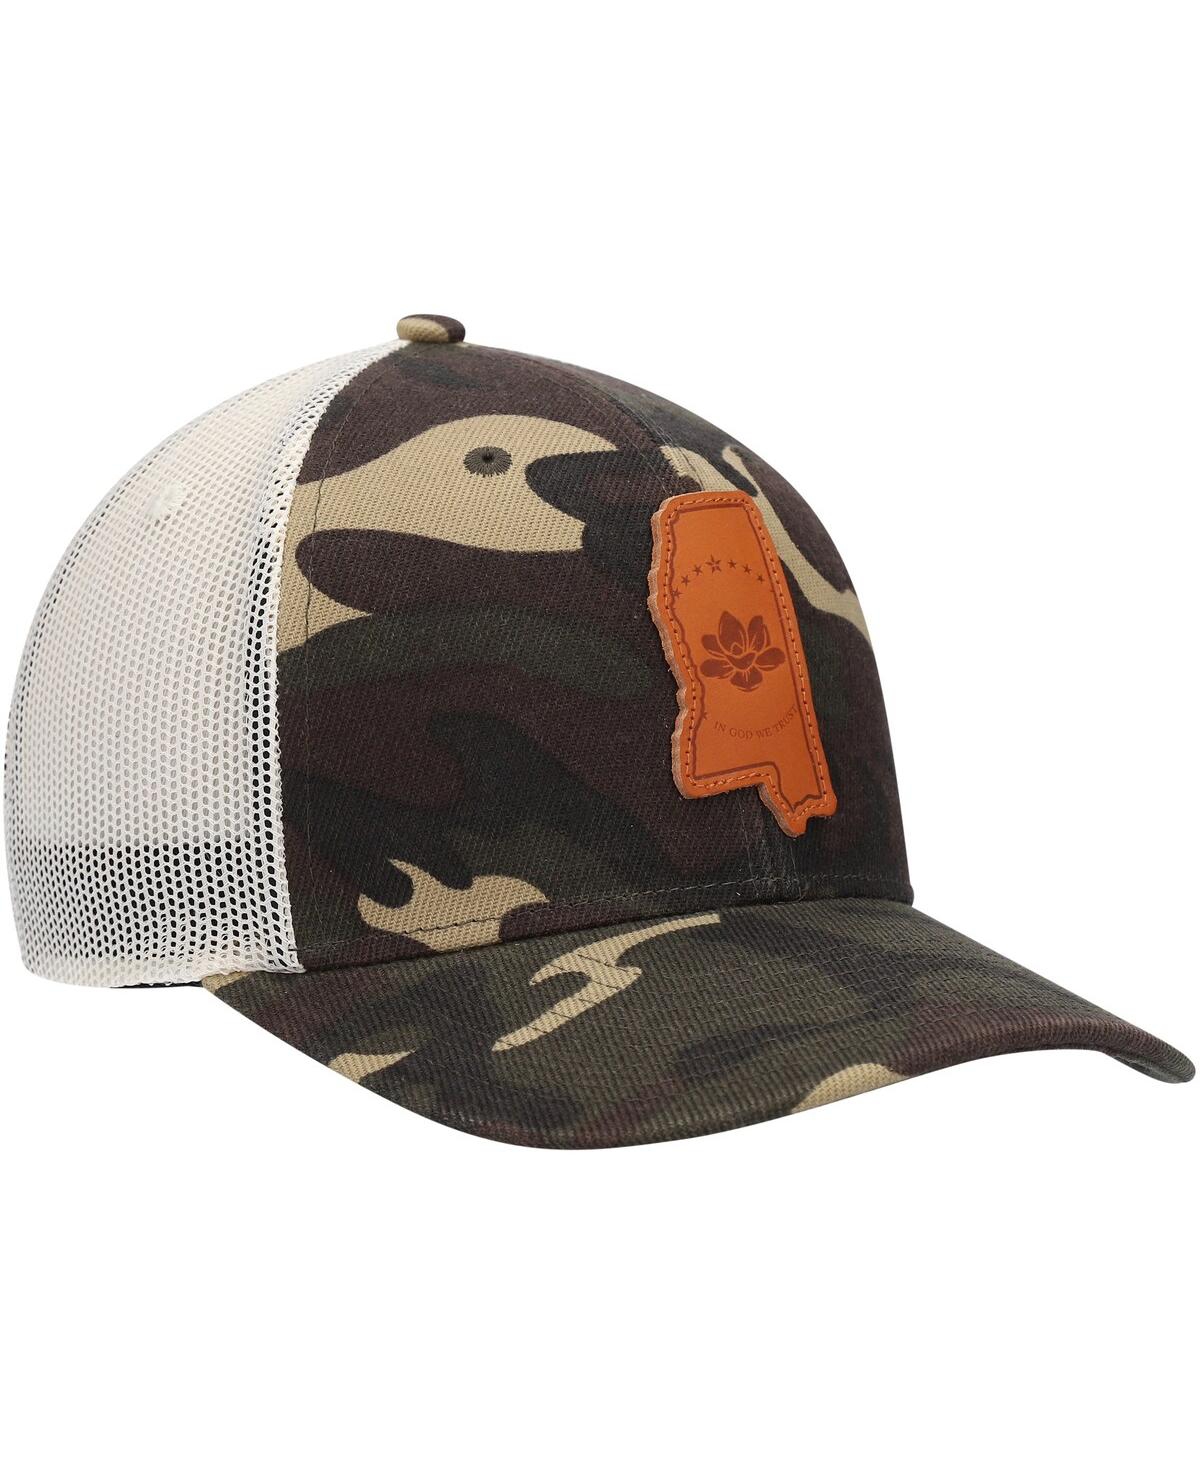 Shop Local Crowns Men's  Camo Mississippi Icon Woodland State Patch Trucker Snapback Hat